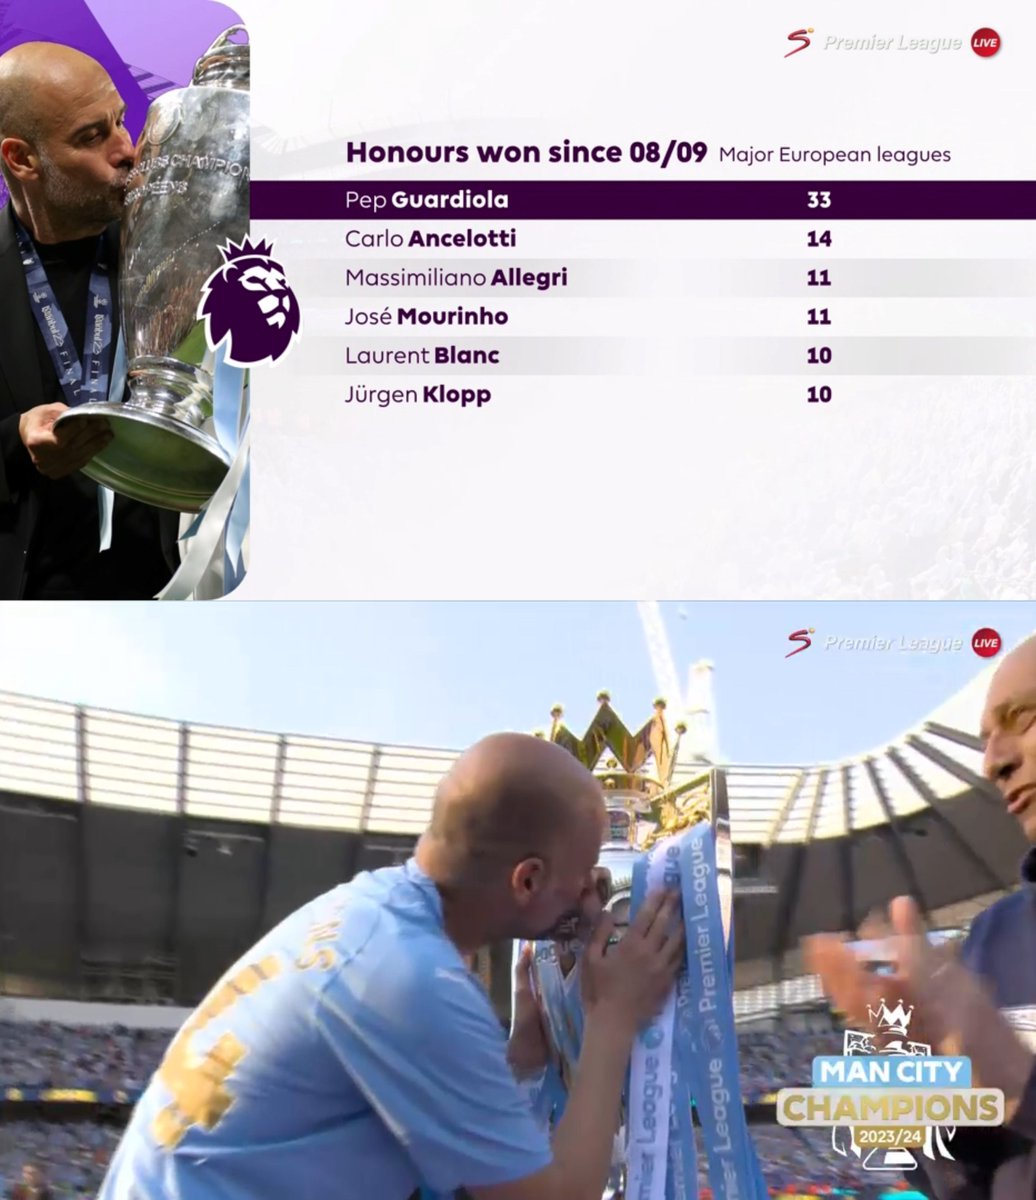 Pep's numbers though 🤯🤯🤯